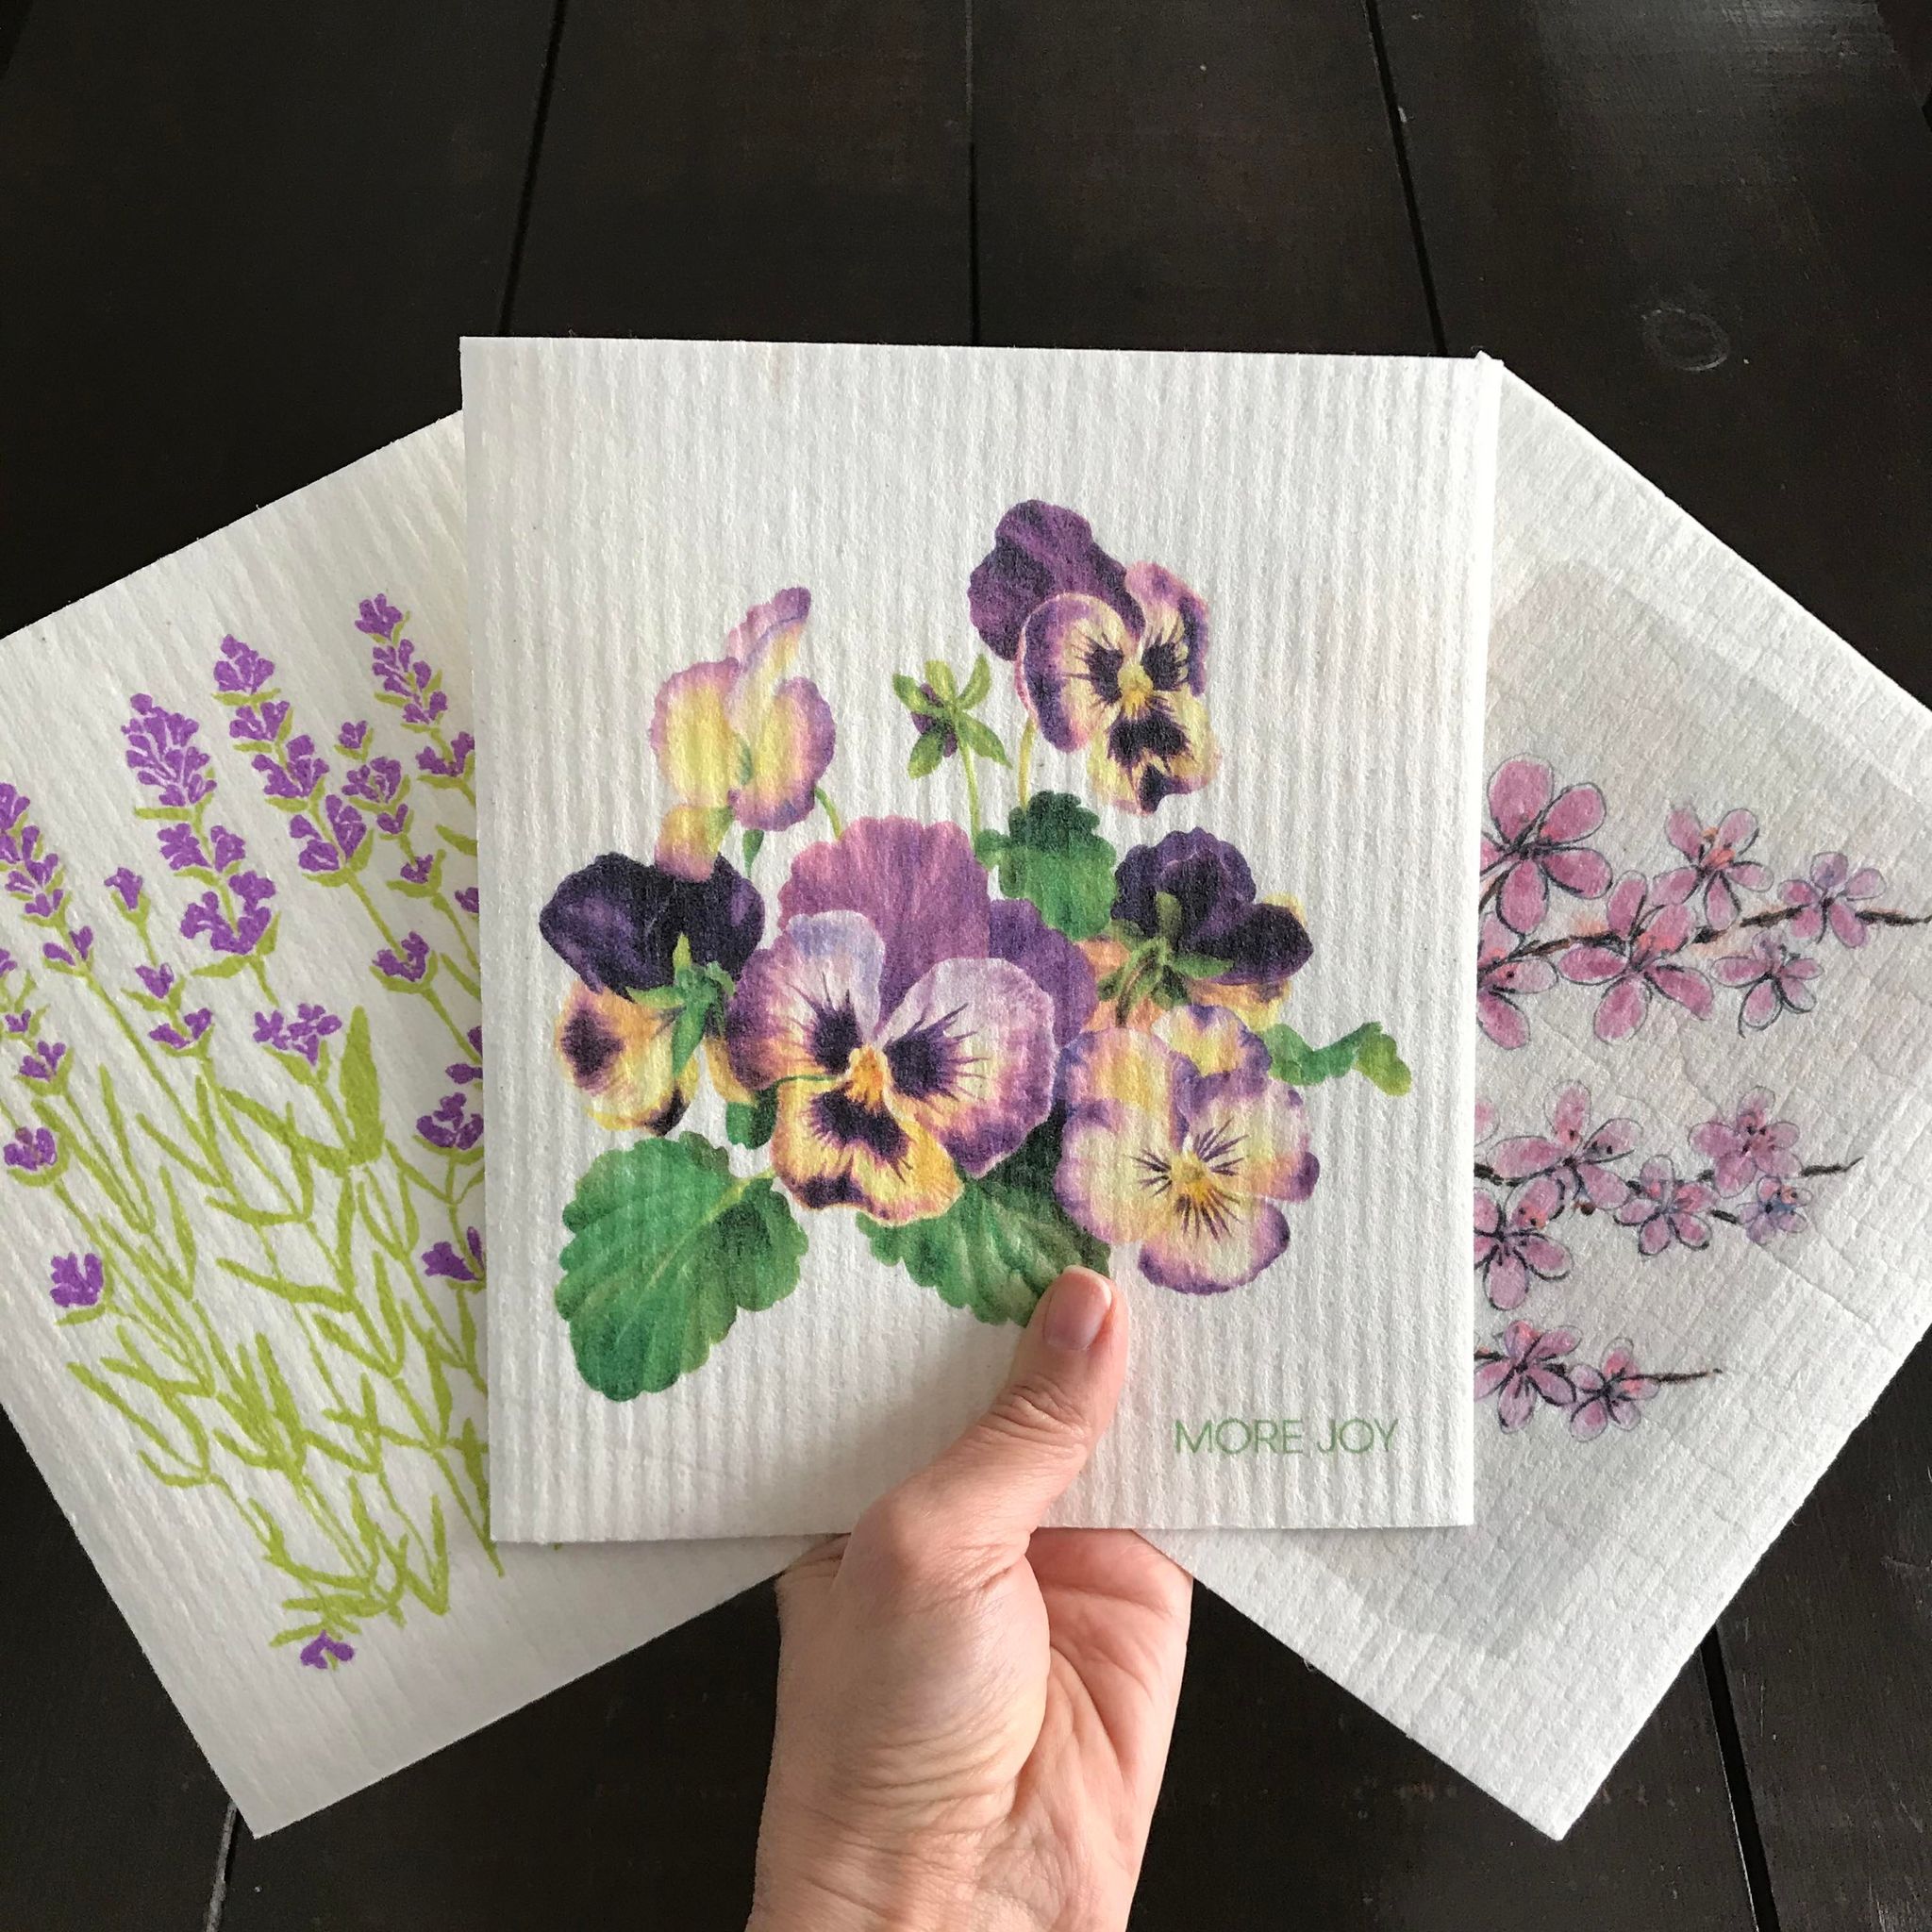 Eco friendly biodegradable and compostable more joy swedish sponge cloths available in canada in a variety of flower patterns